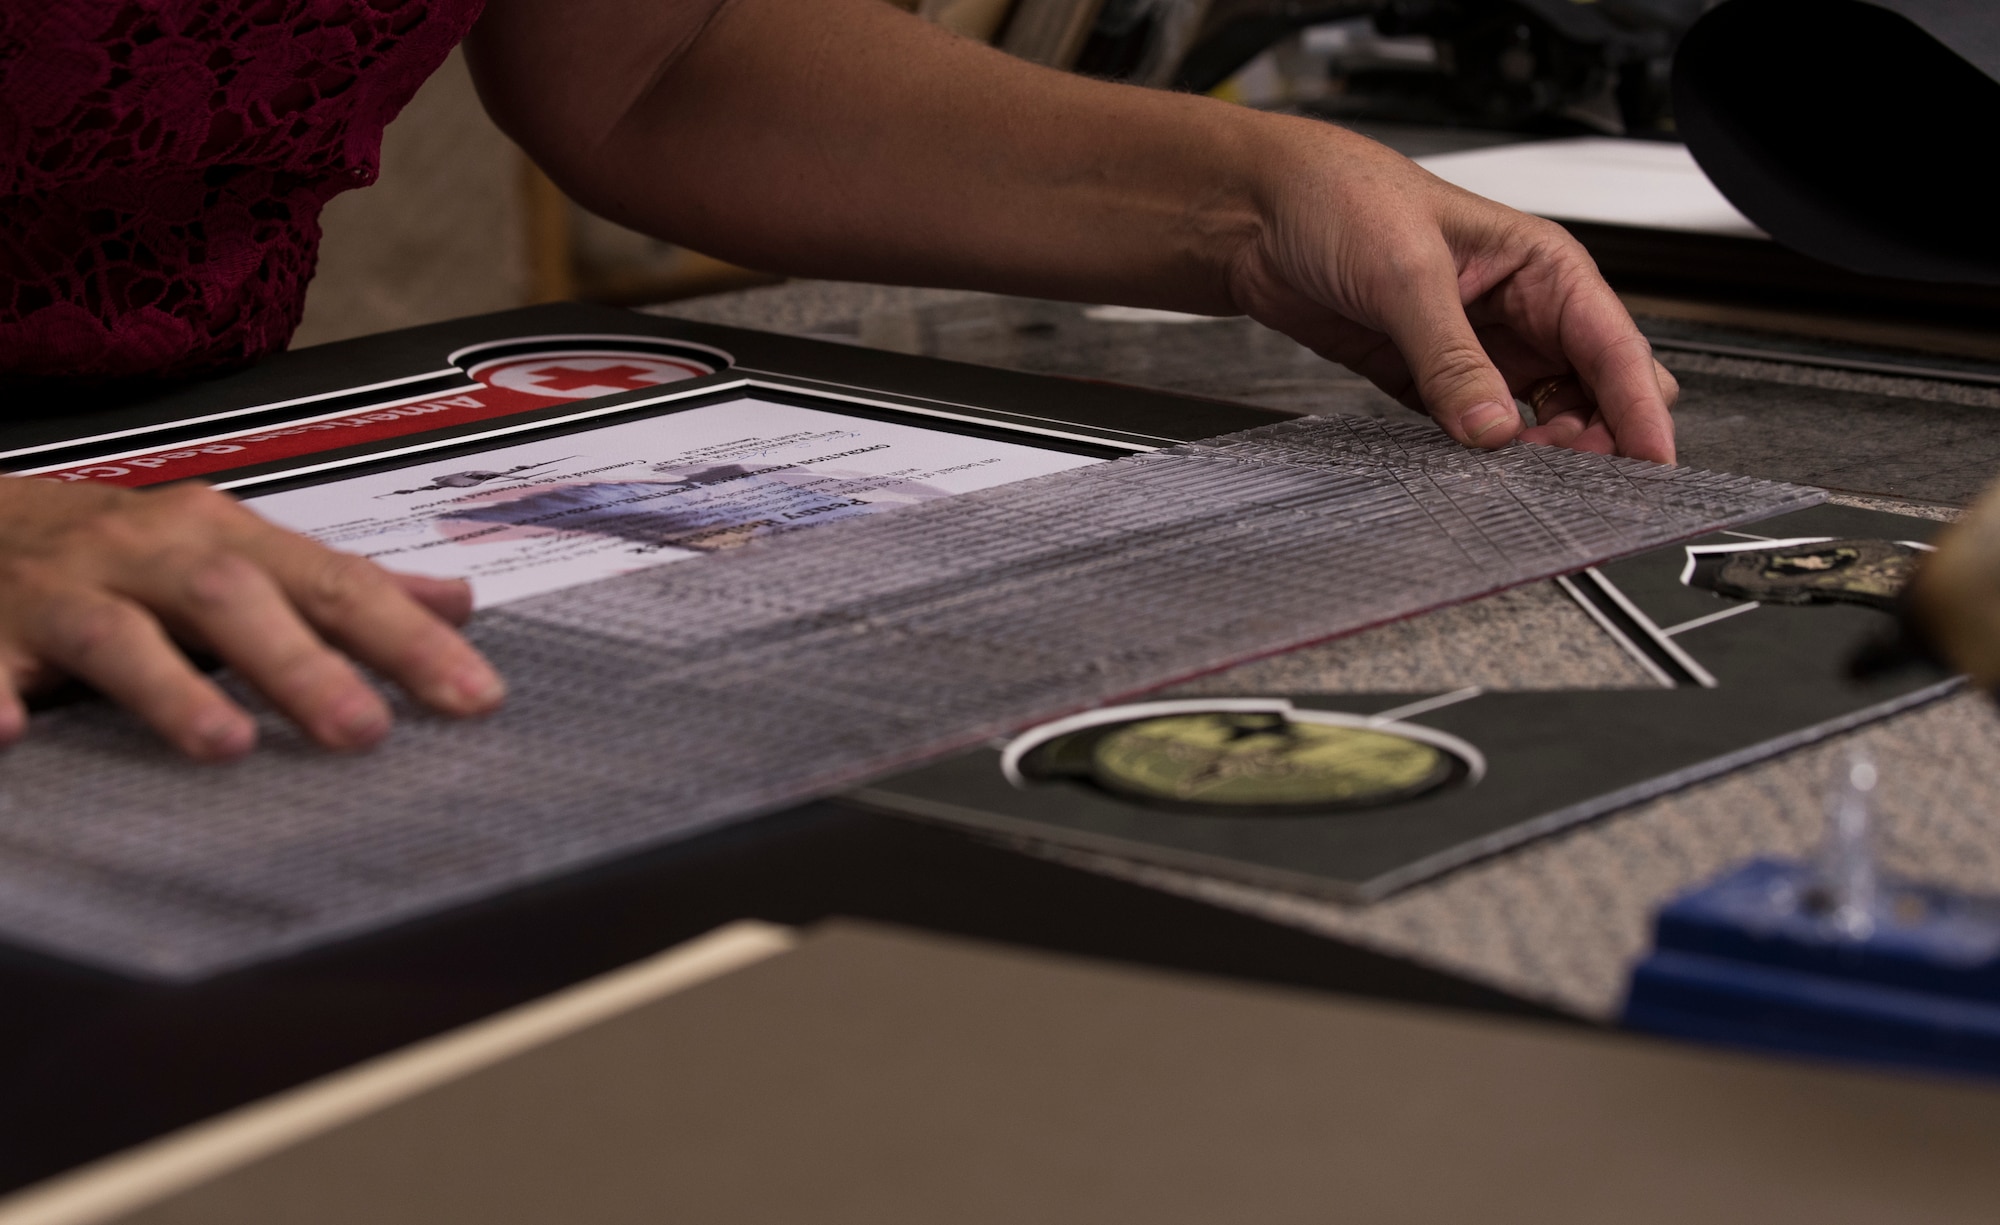 Tamra Windows, 90th Force Support Squadron Arts and Crafts Center employee, measures a framing mat before placing it into the custom built frame June 27, 2018, on F.E. Warren Air Force Base, Wyo. A few items that can be custom made in the shop are awards, shadow boxes and t-shirts. (U.S. Air Force photo by Senior Airman Abbigayle Williams)